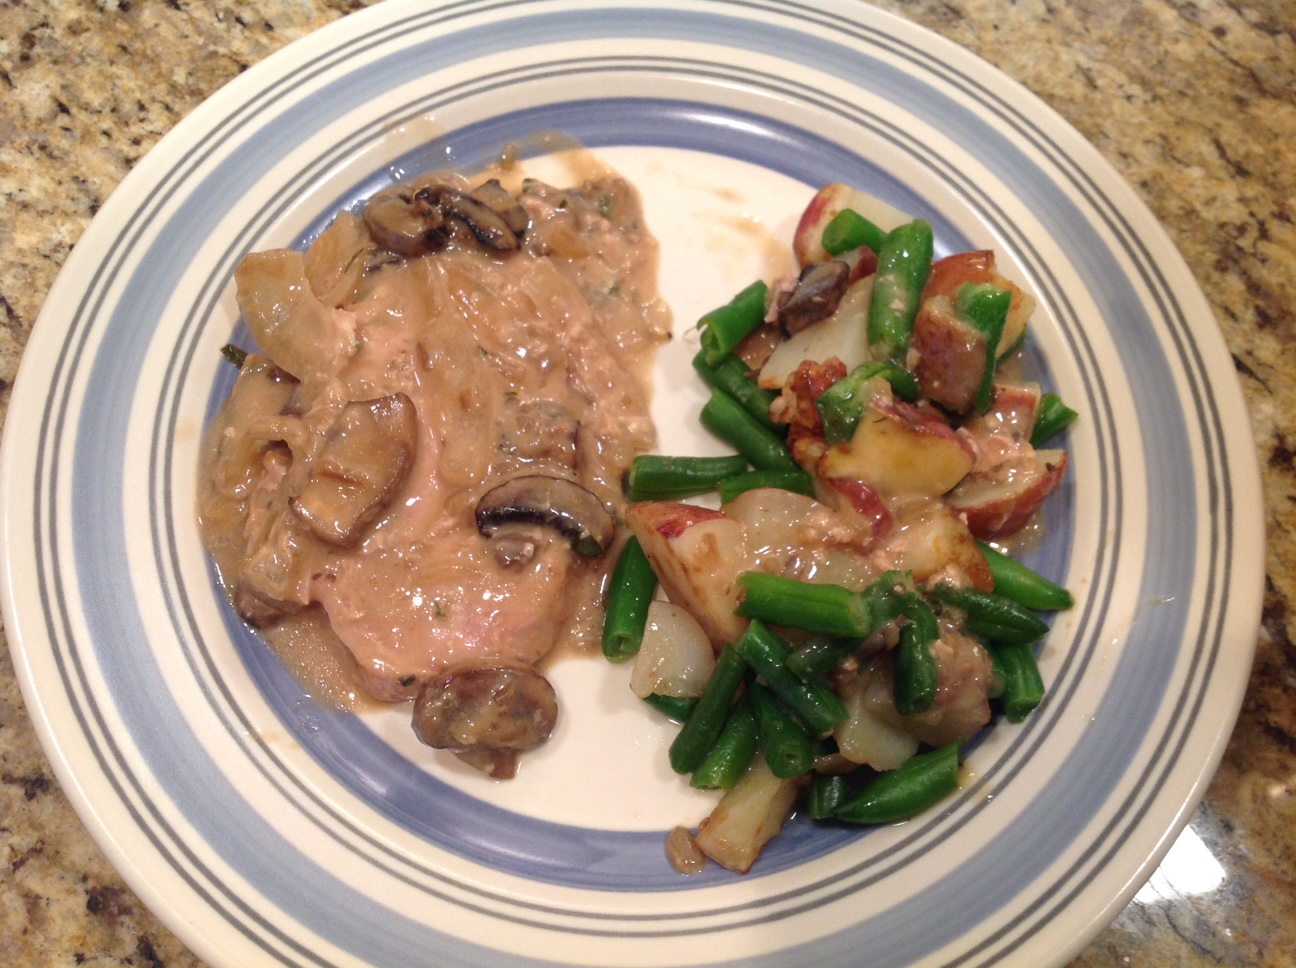 Slow Cooker Pork Chops with mushroom and onion gravy